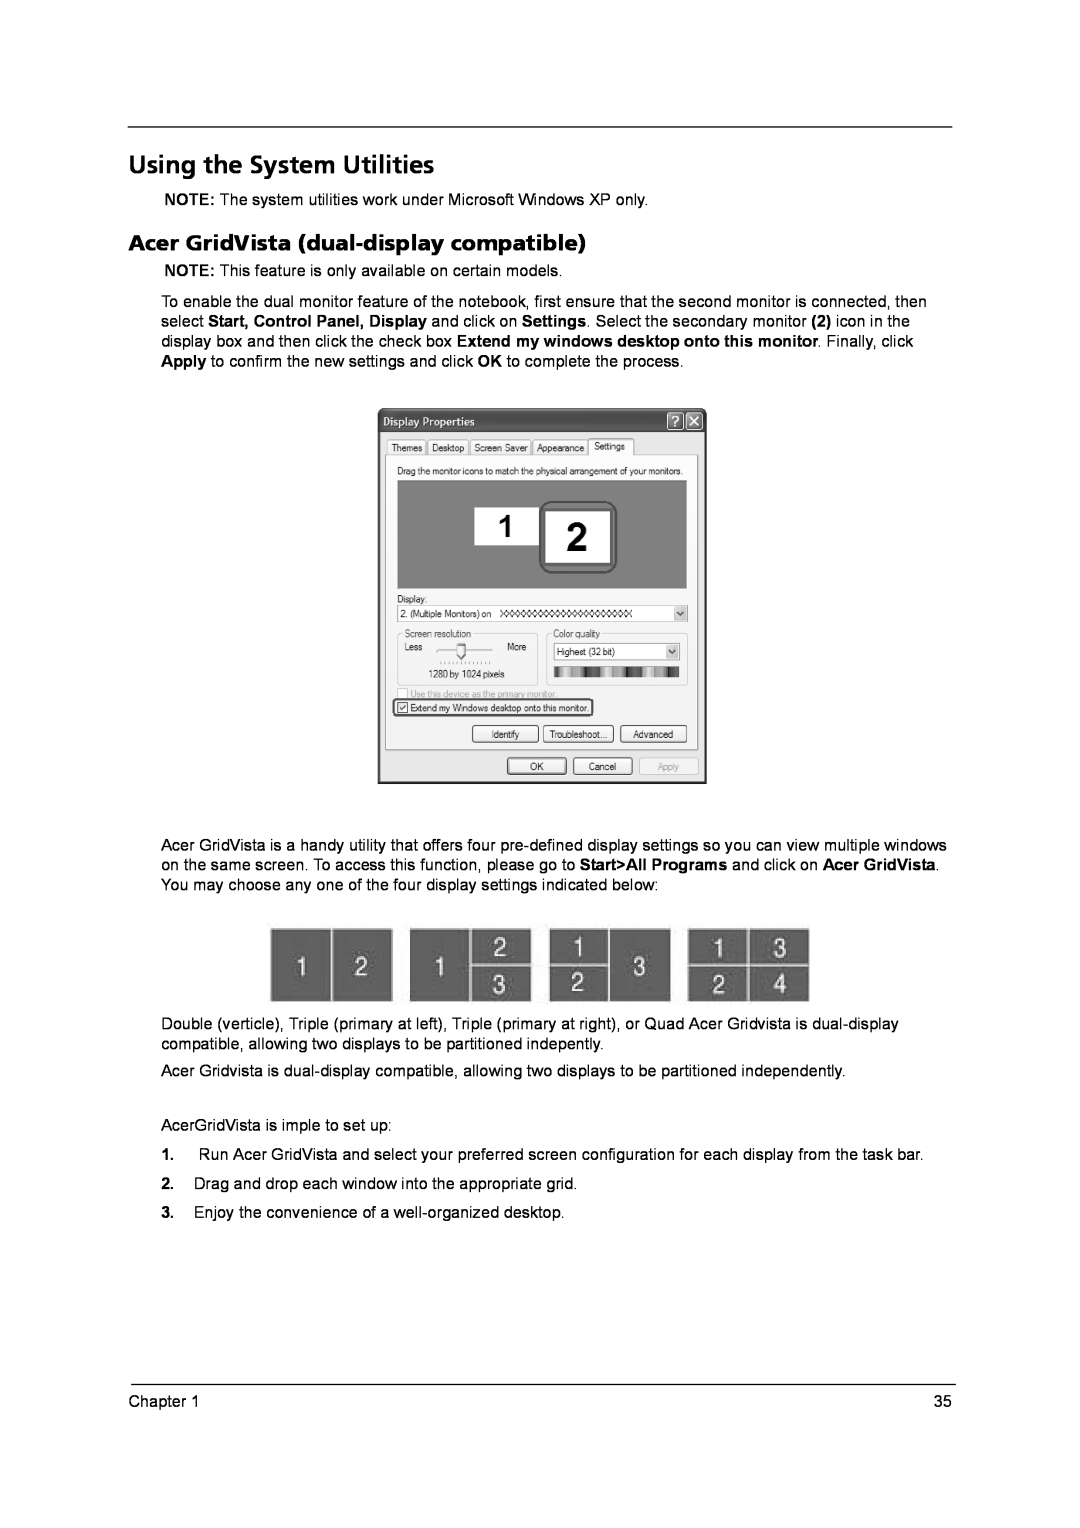 Acer 9800 manual Using the System Utilities, Acer GridVista dual-display compatible 